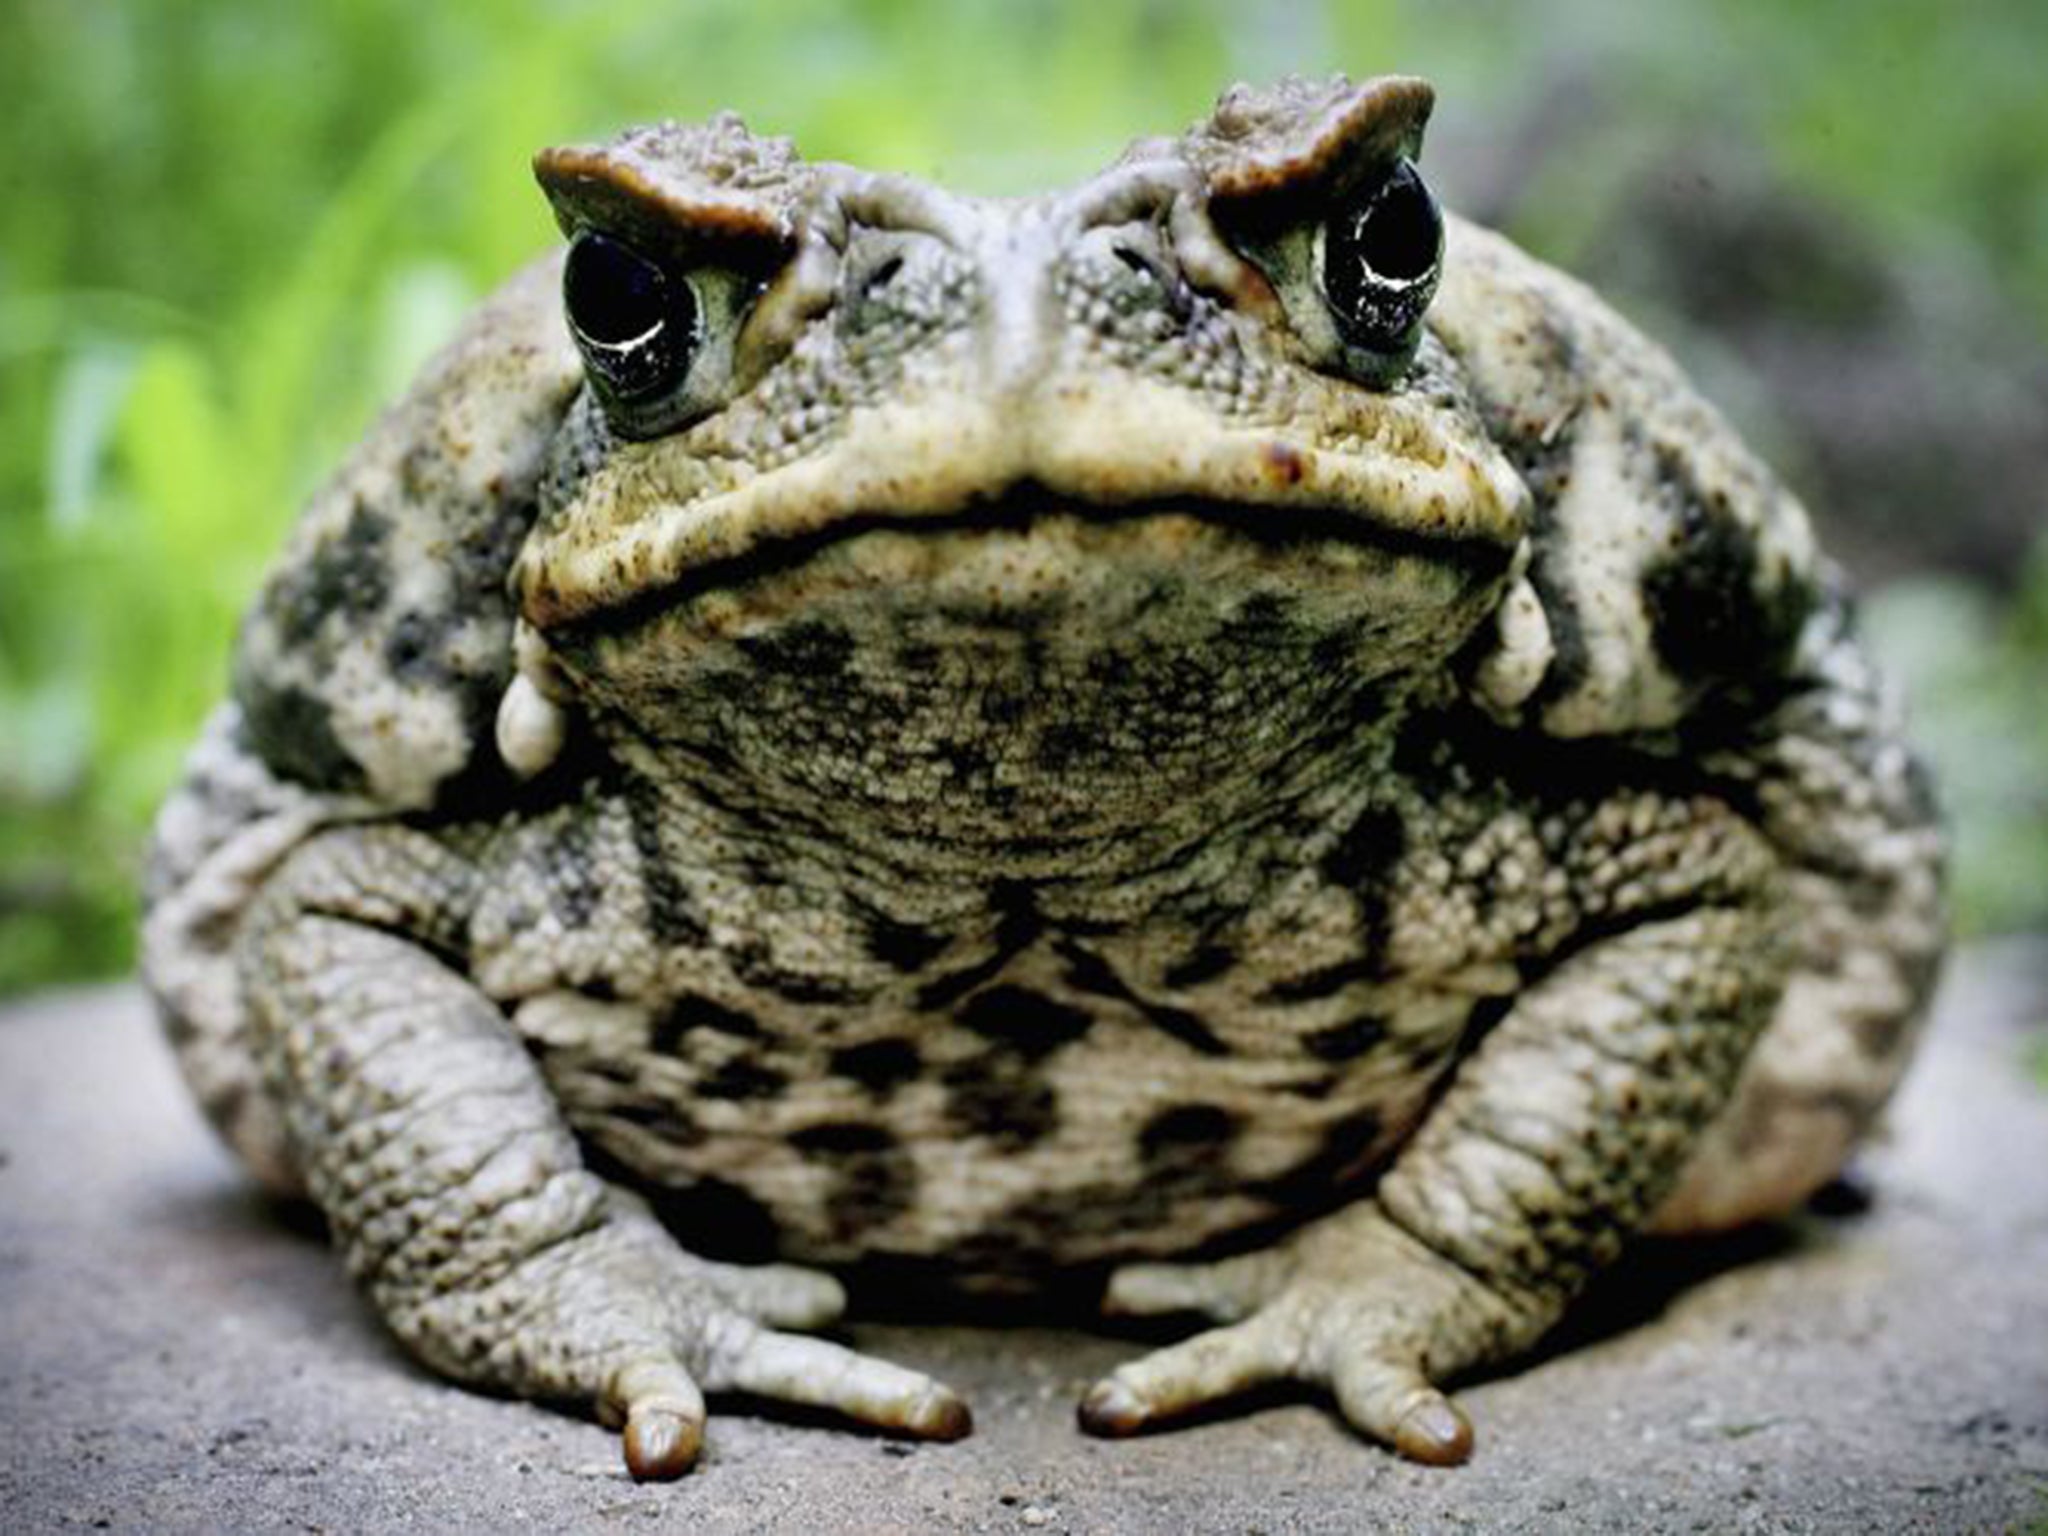 Cane toads shoot venom at enemies and have toxic skin